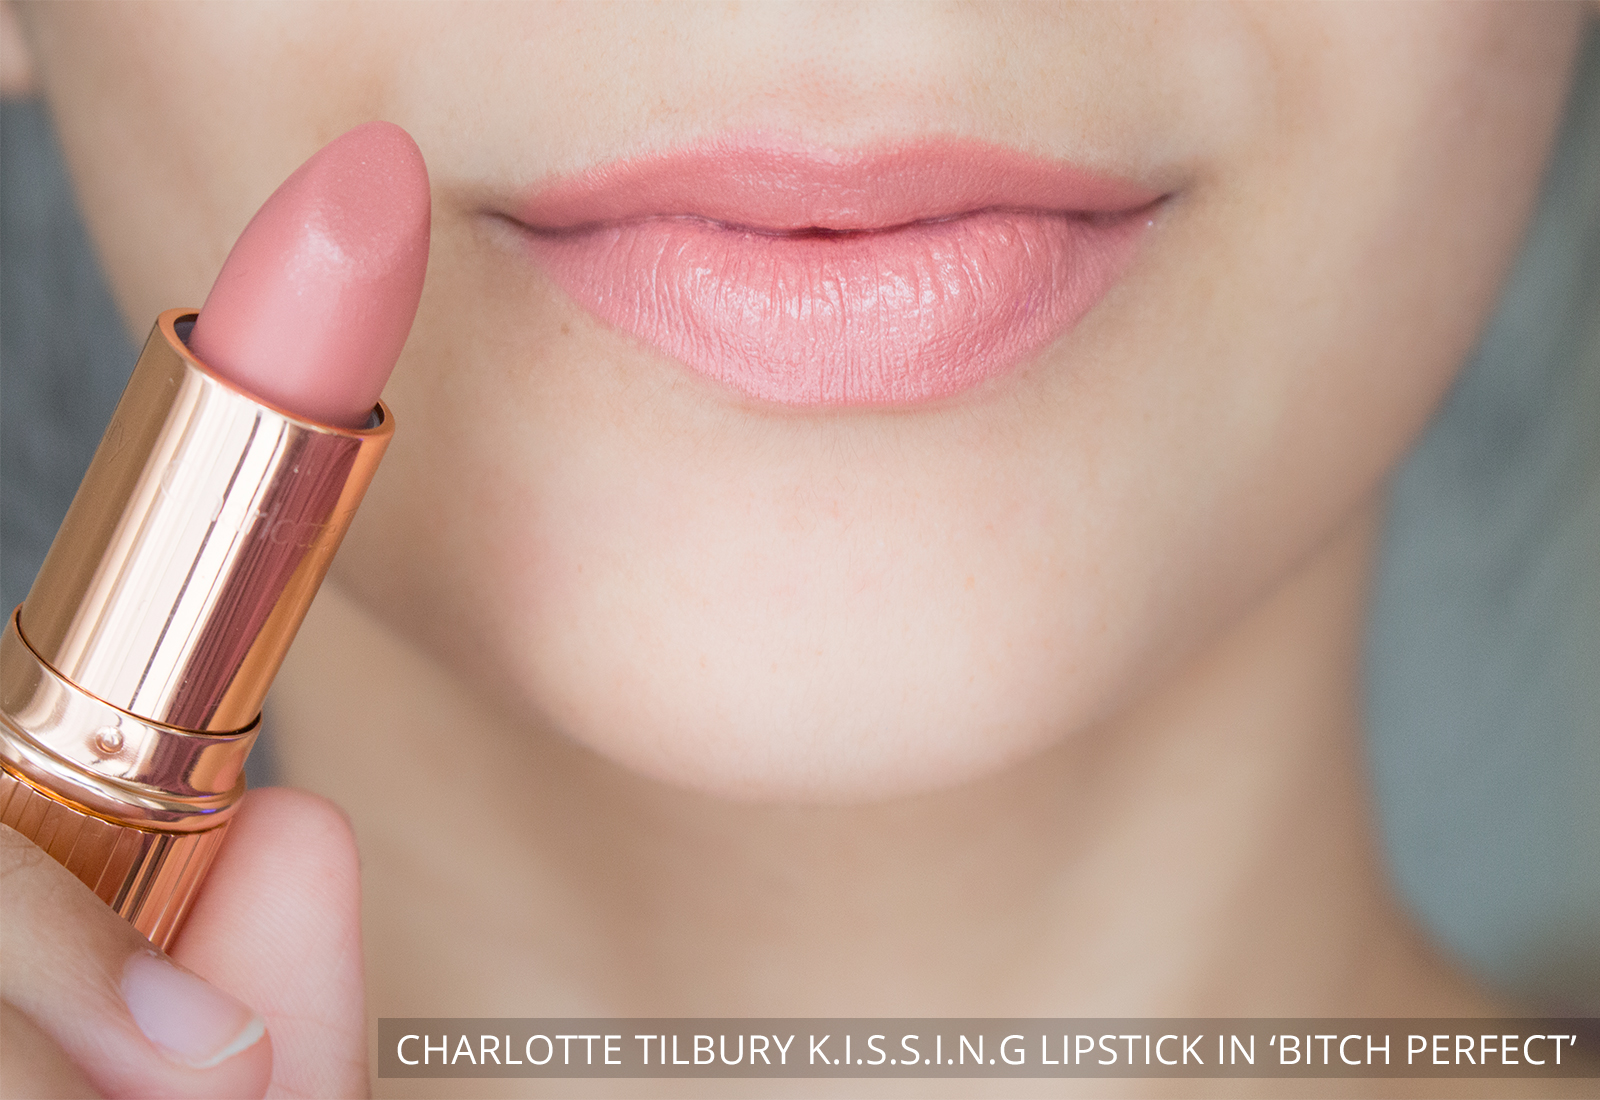 Charlotte Tilbury Bitch Perfect K.I.S.S.I.N.G Lipstick (Review and Swatches)